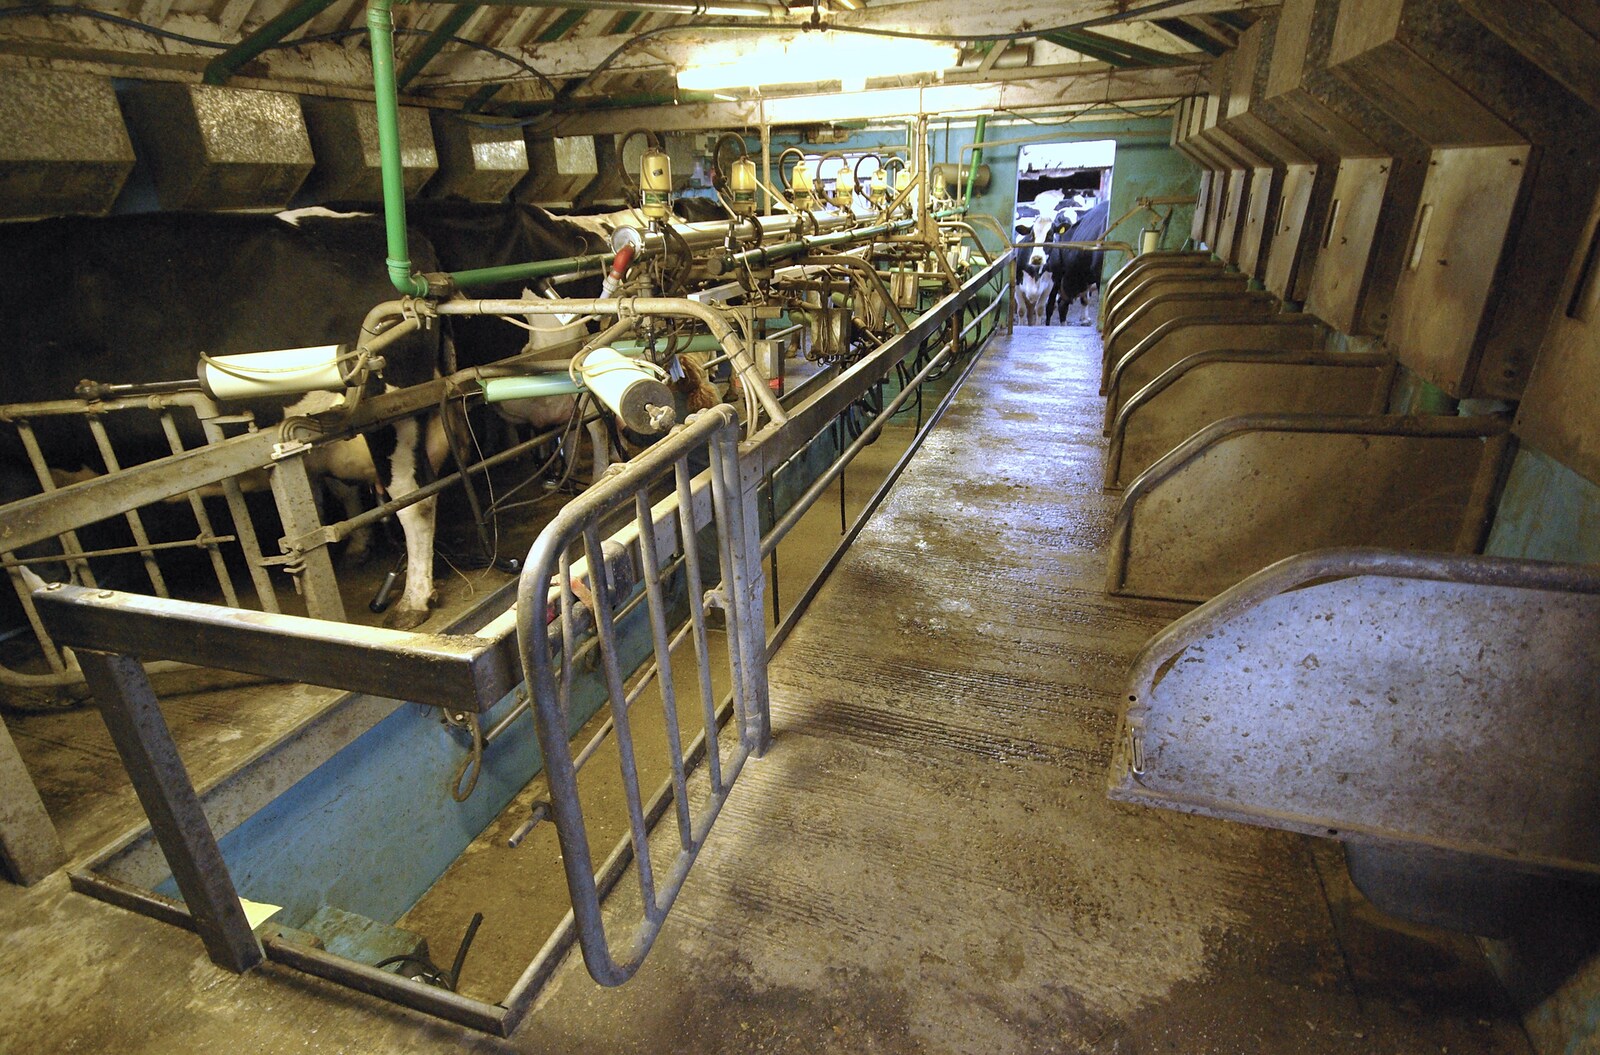 The first cows are installed from The Last Milking at Dairy Farm, Thrandeston, Suffolk - 11th January 2007